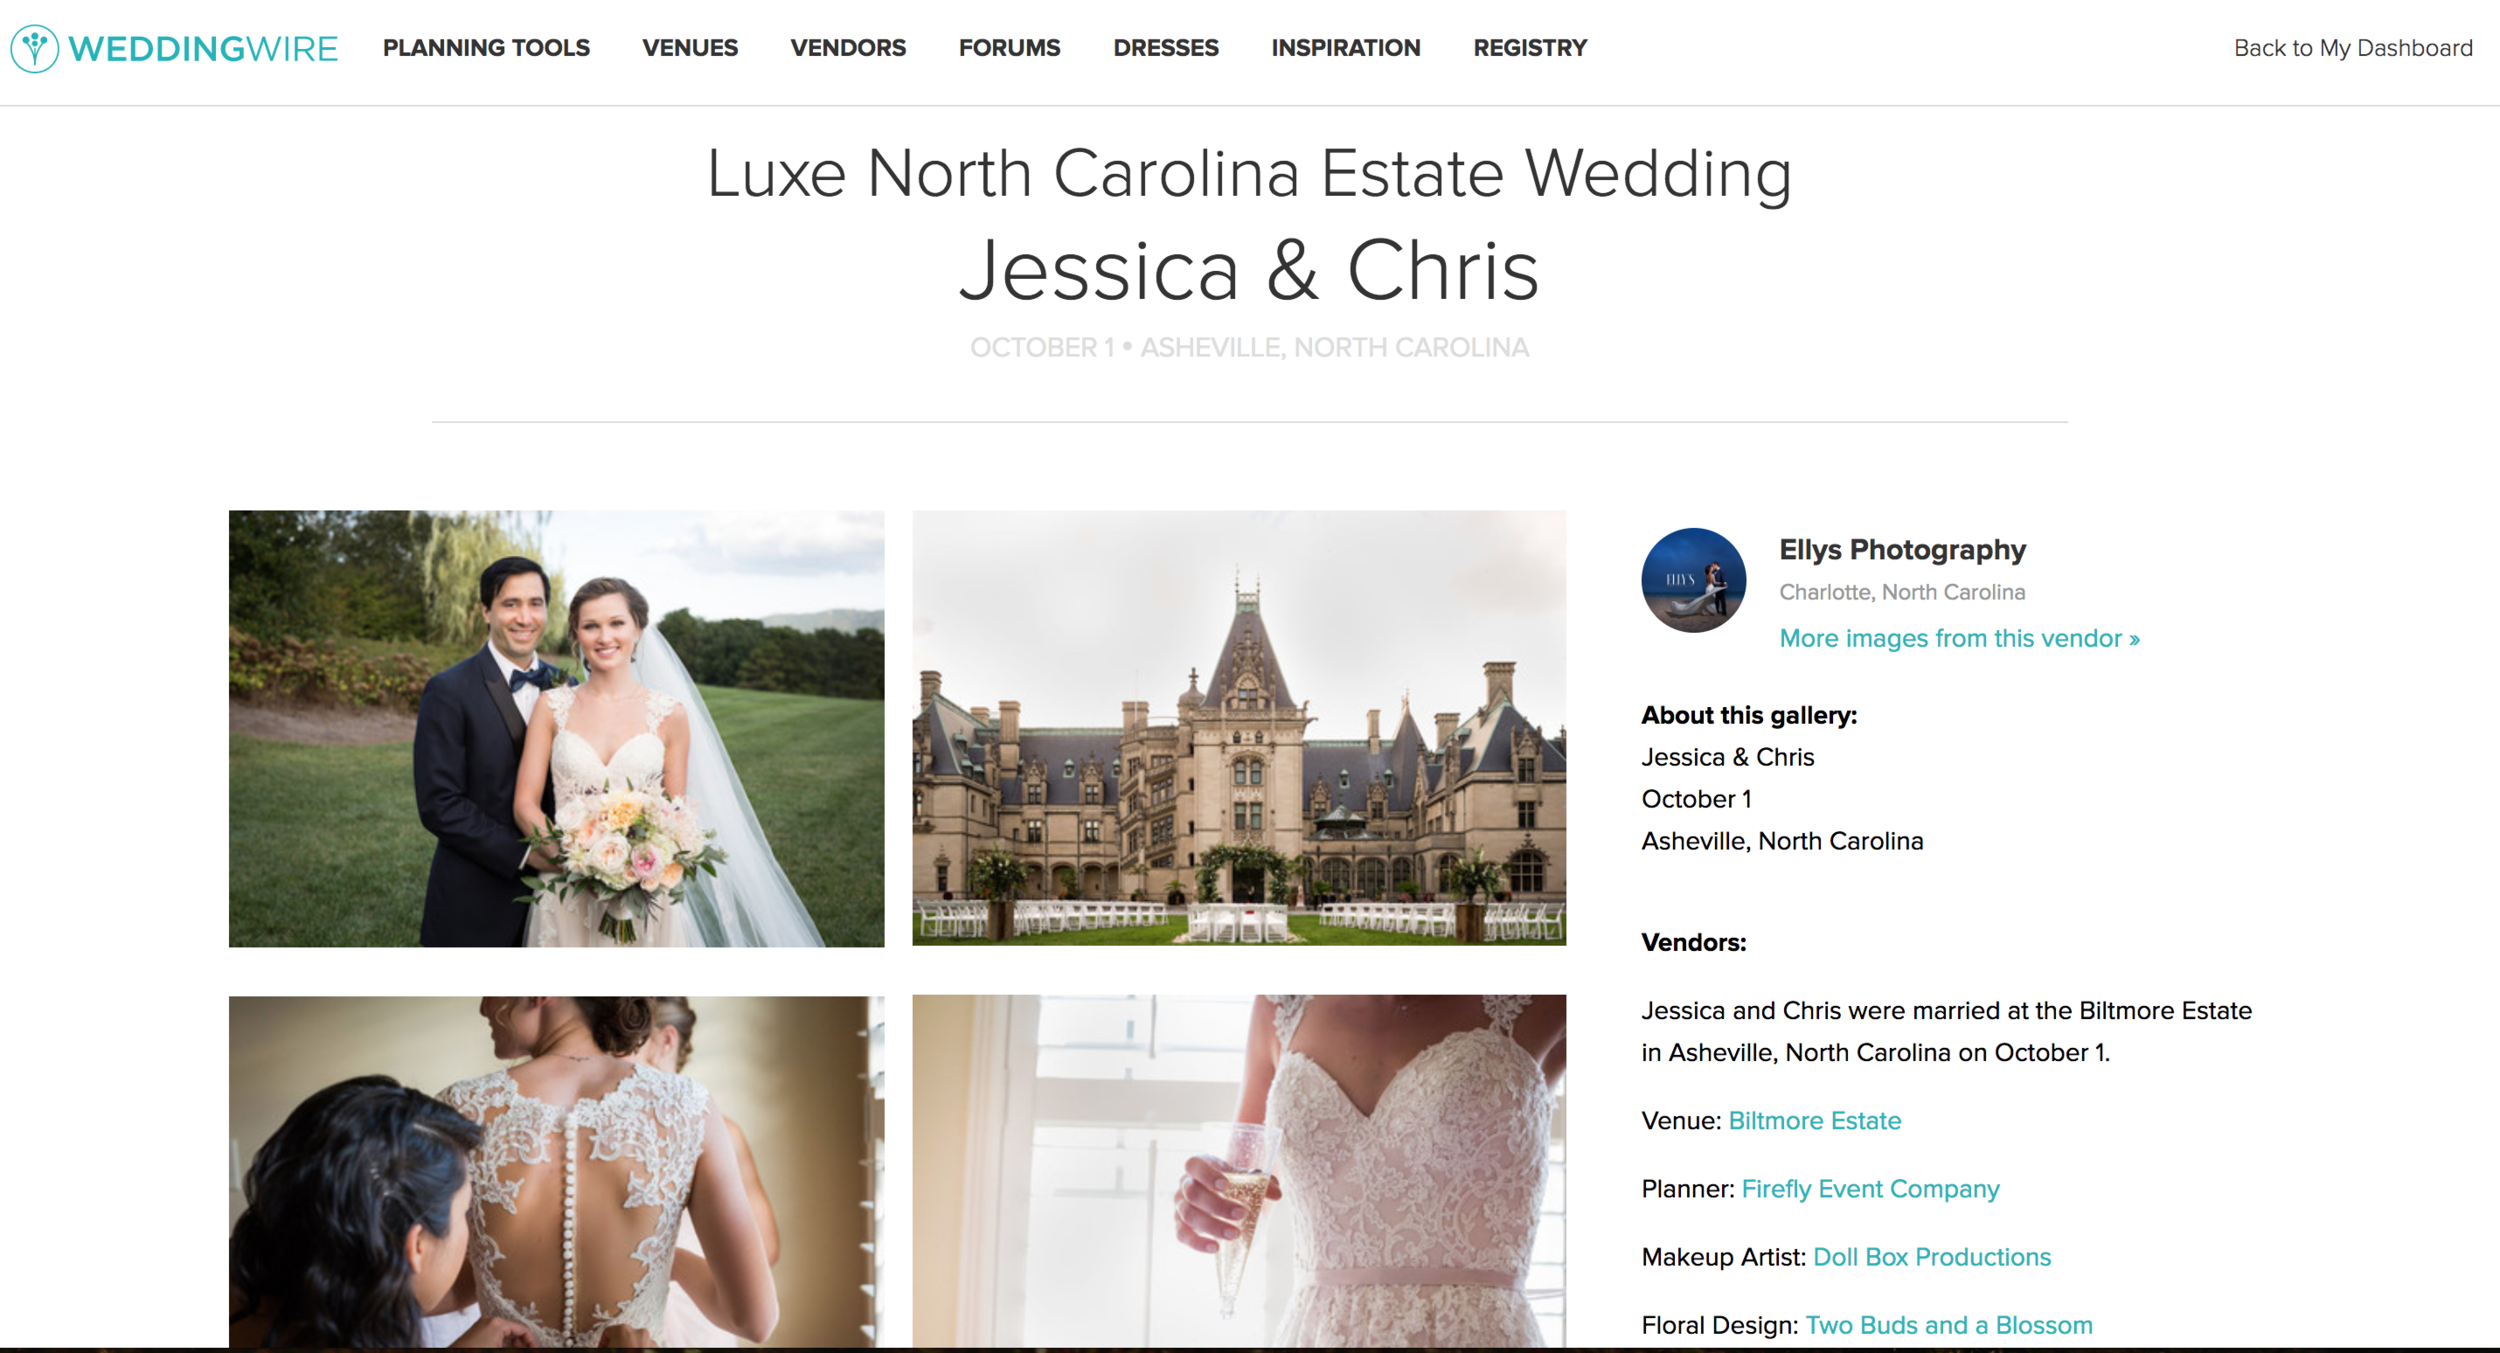 Click here to view their feature on WeddingWire!